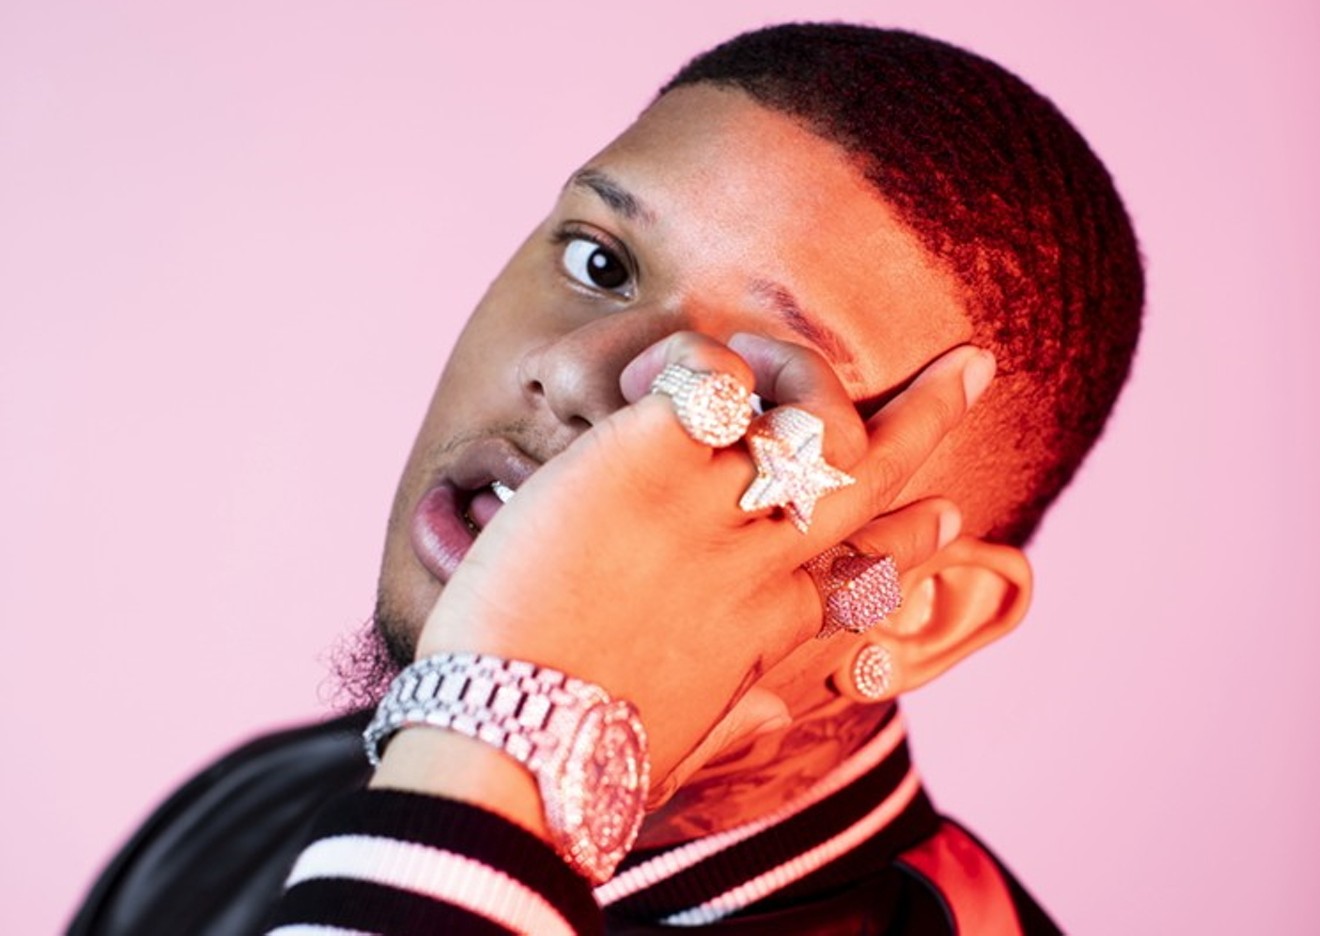 Yella Beezy rose from Oak Cliff to the top of hip-hop, and he's ready to help pull up other Dallas rappers behind him.